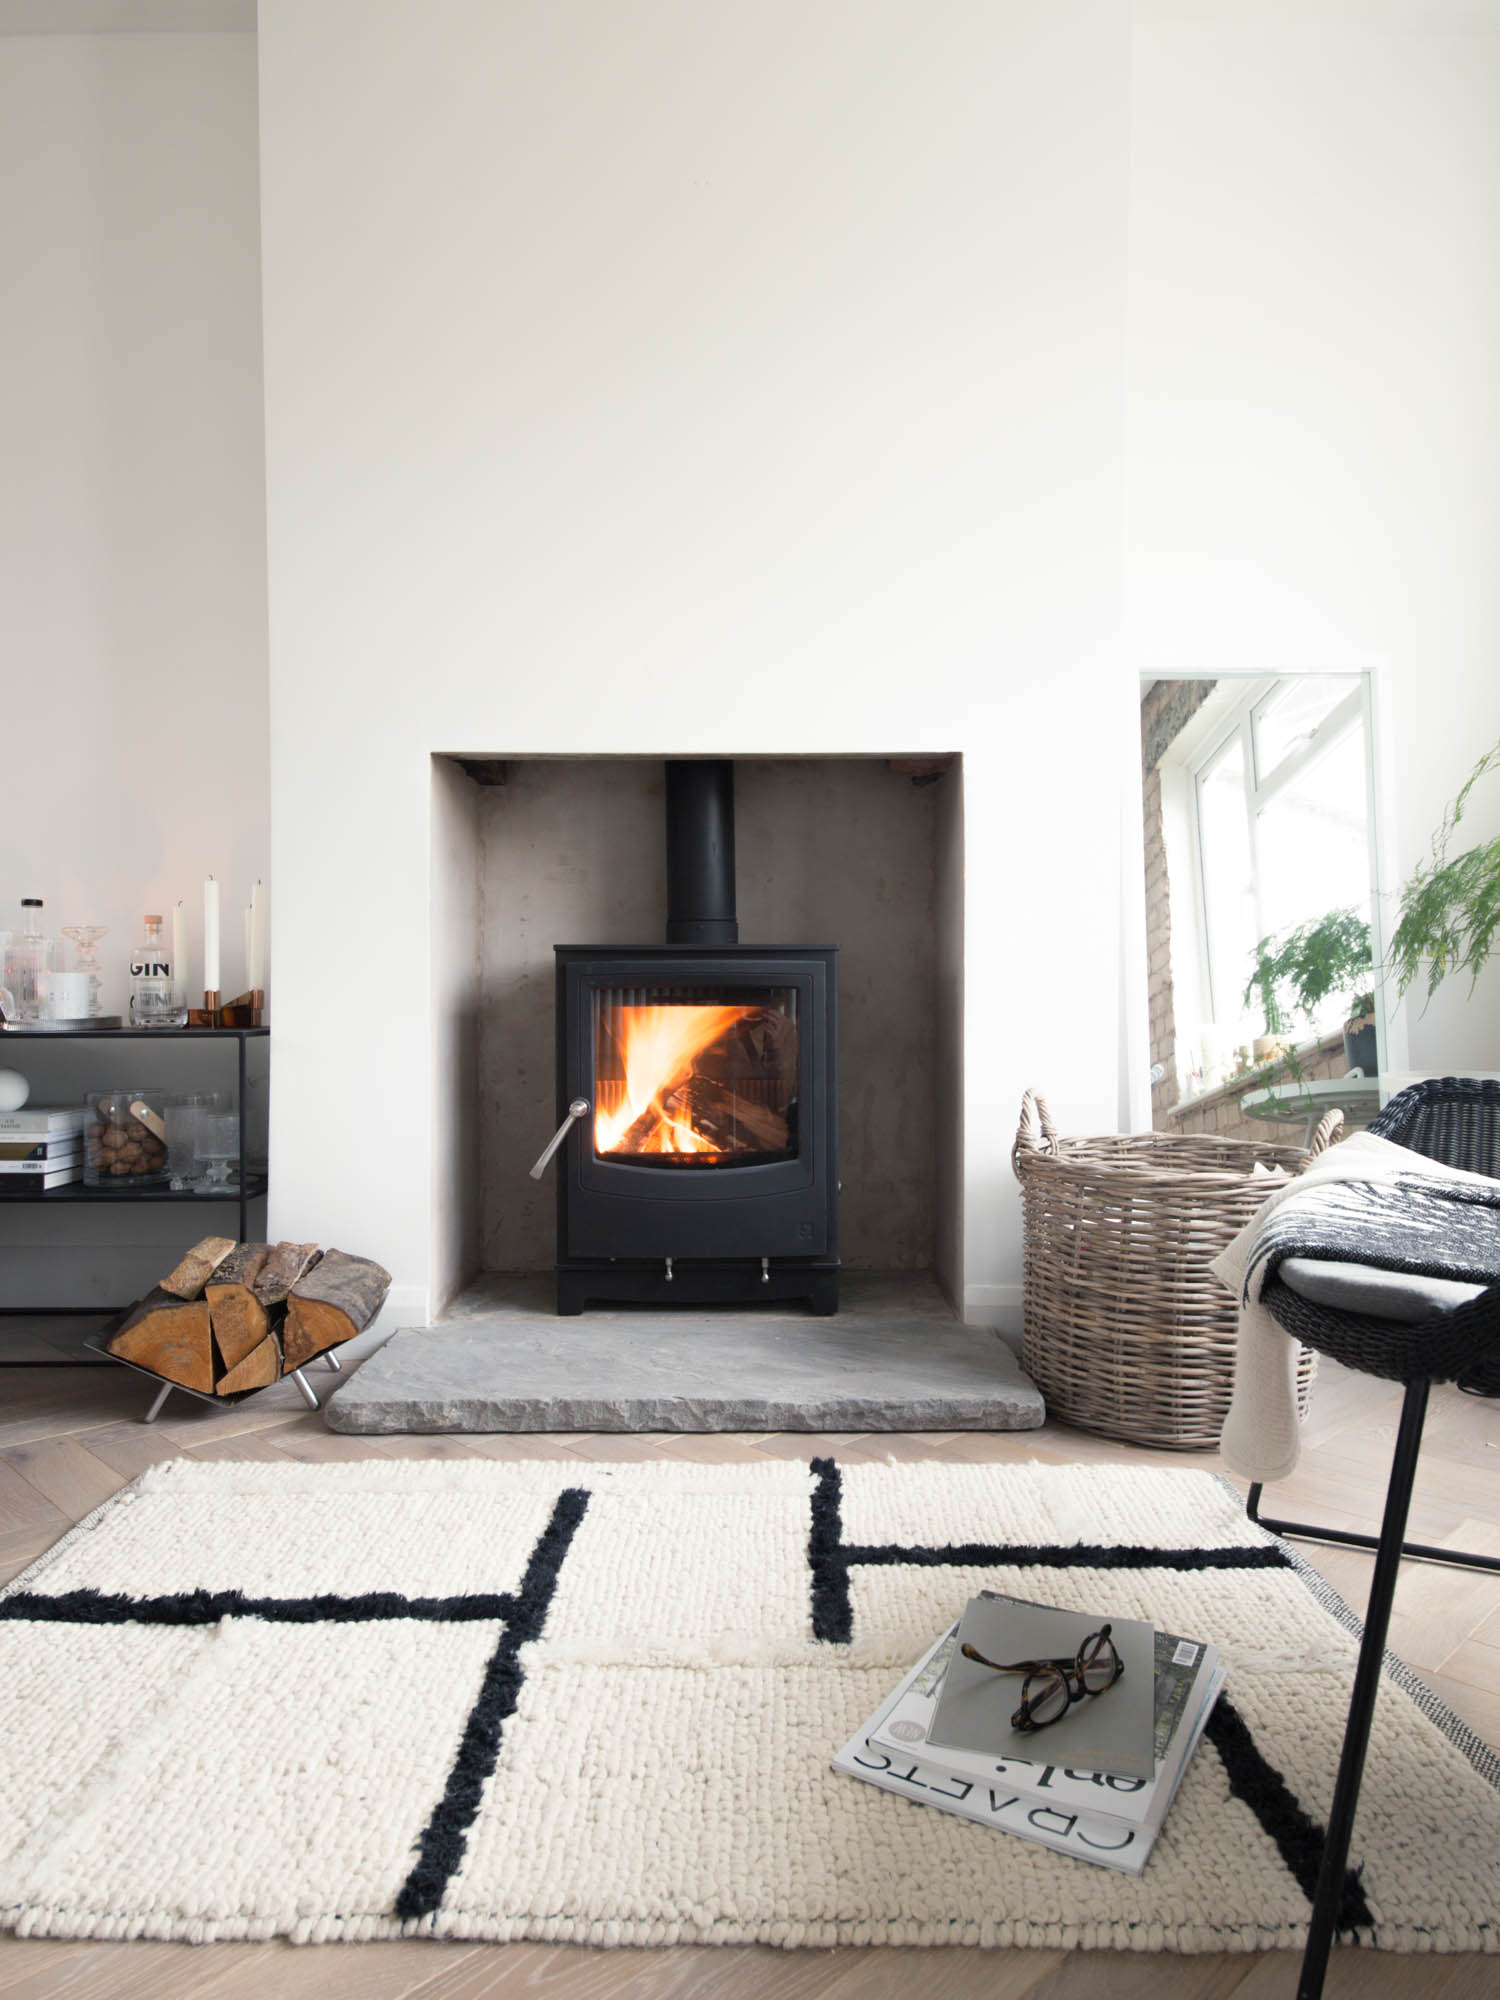 Installing a wood burning stove - a step by step guide ...